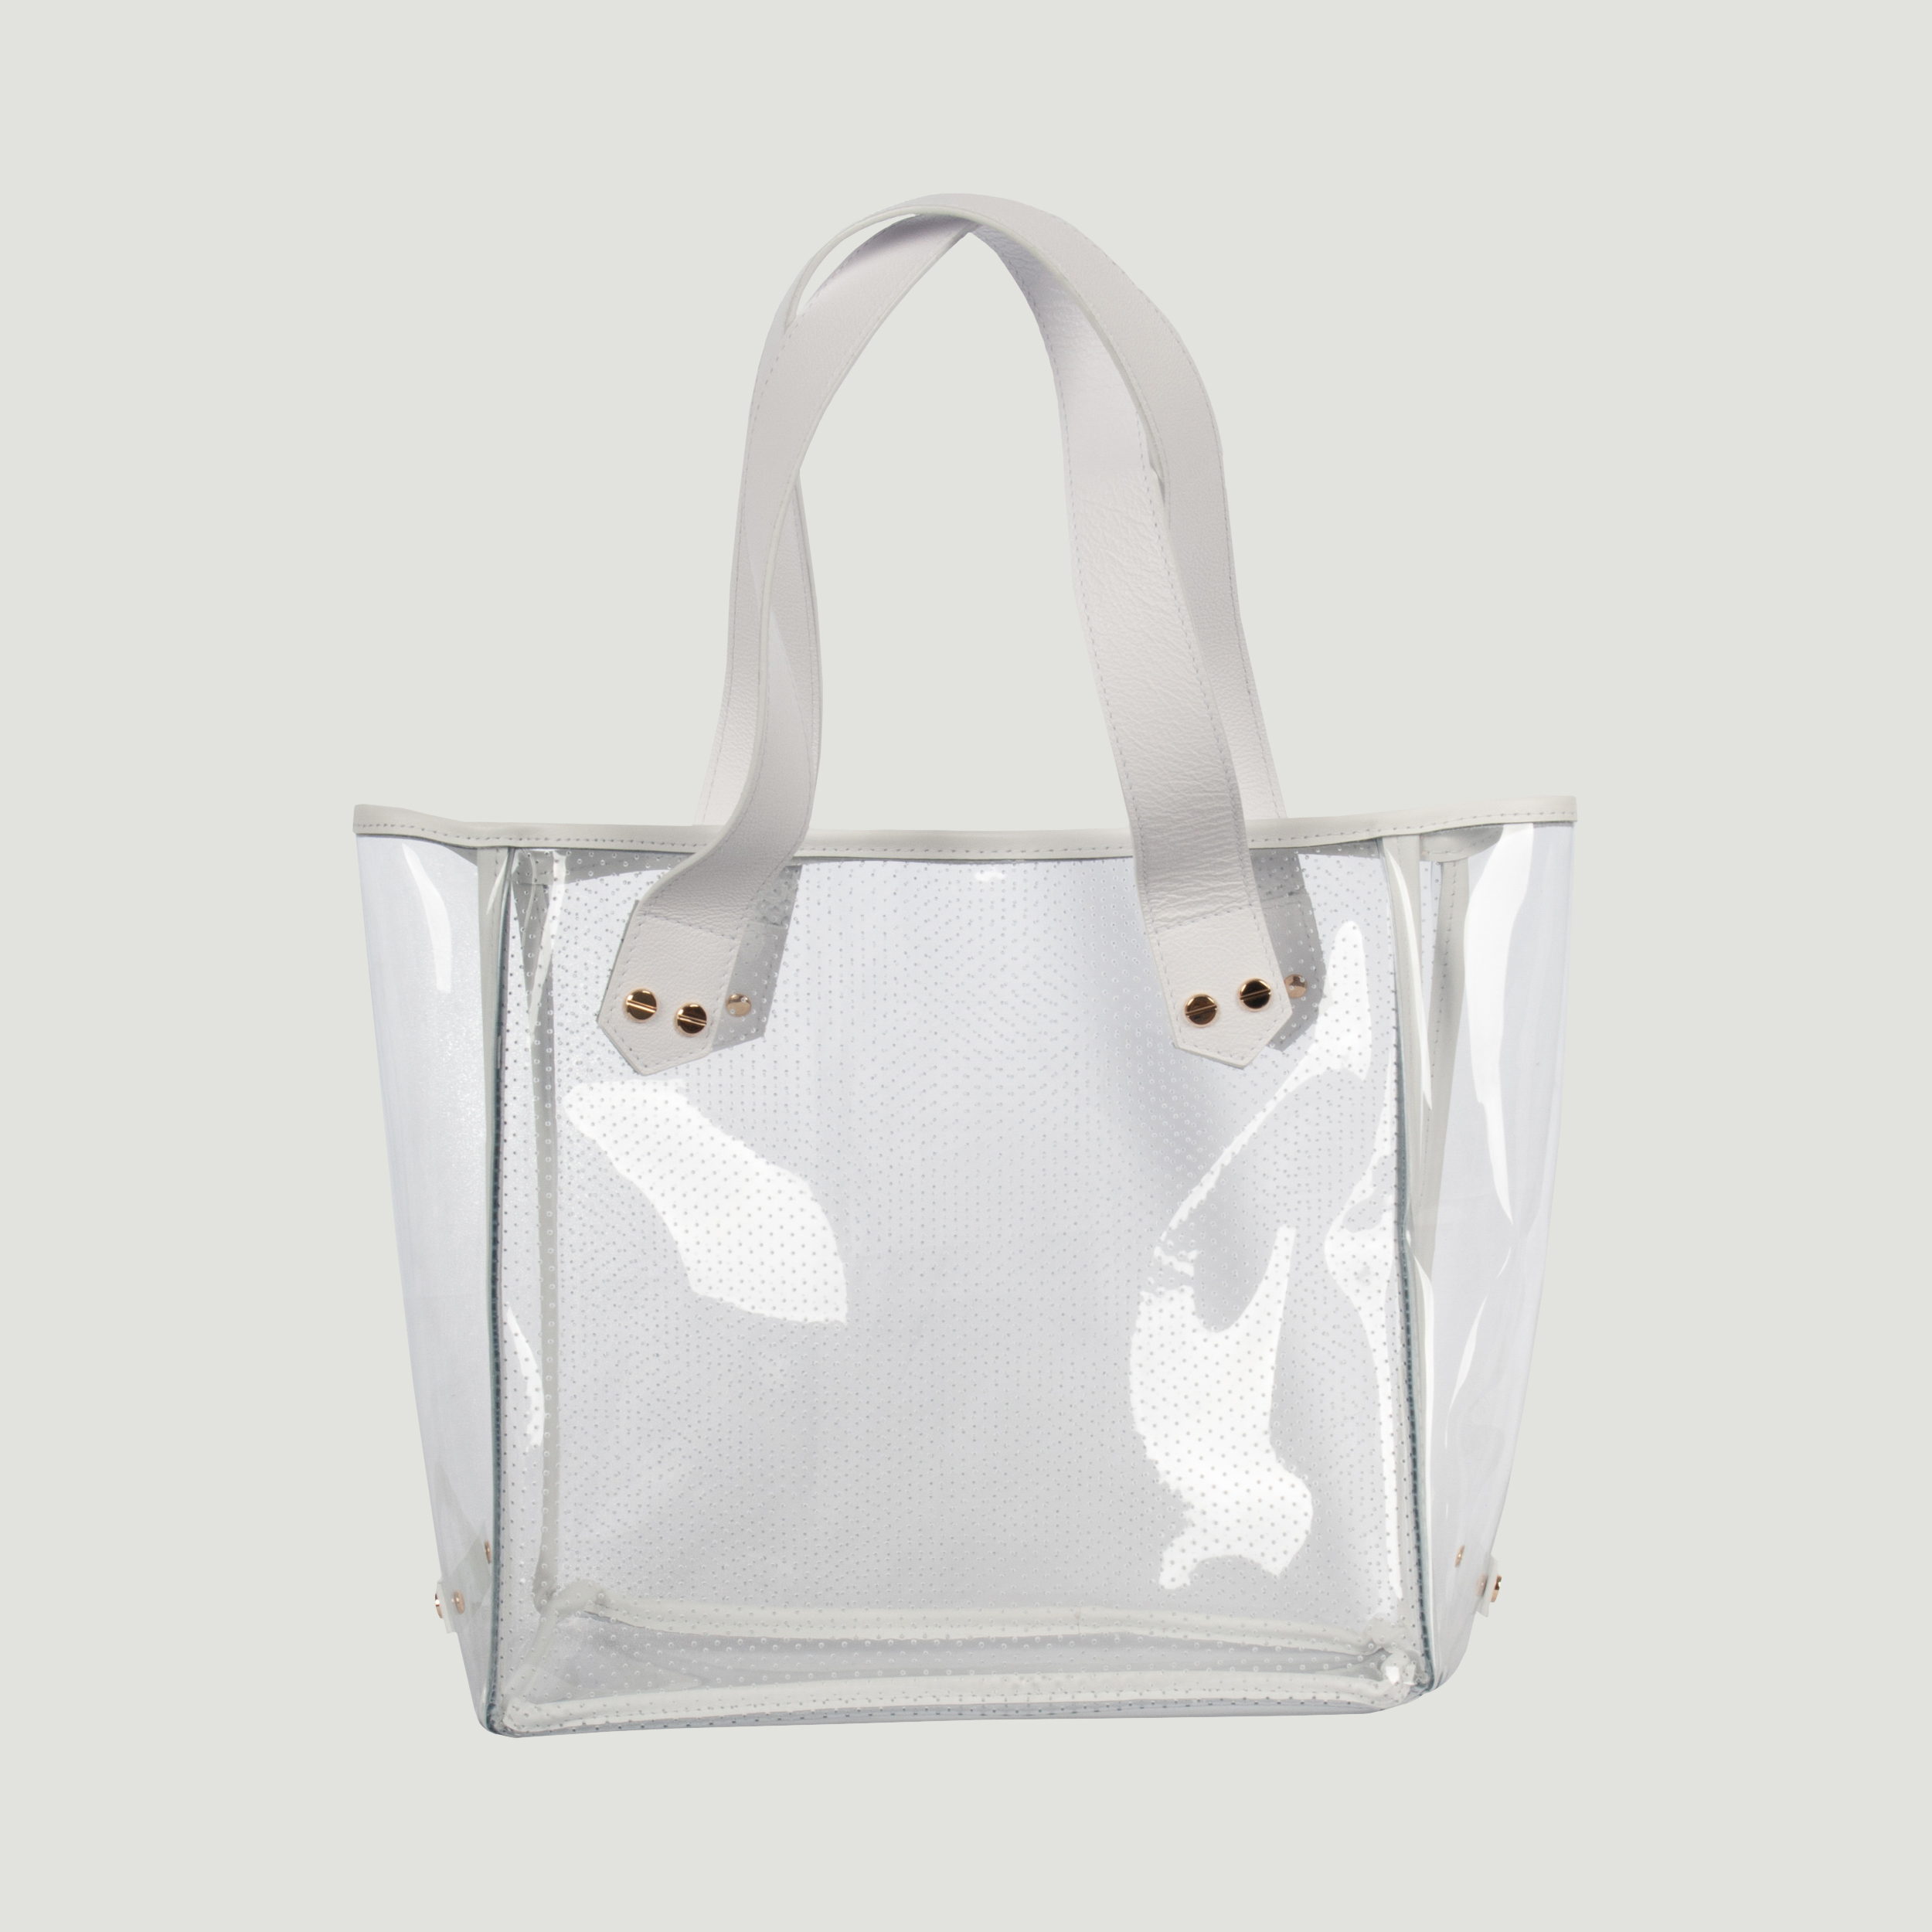 Gameday Bag - Blush Leather / Clear PVC Blush Leather/Clear PVC/Gold Hardware